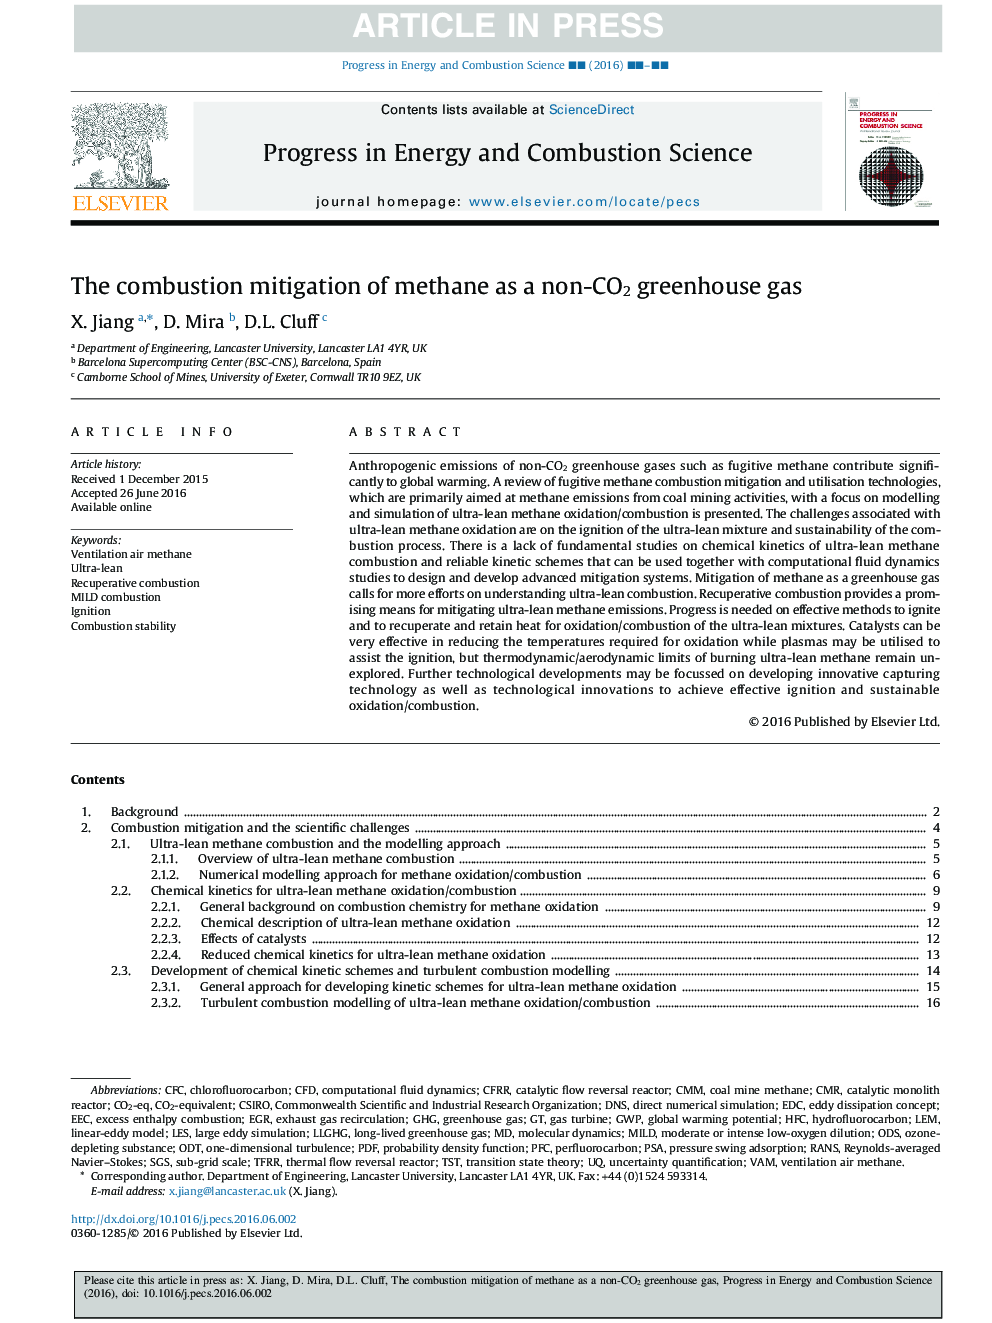 The combustion mitigation of methane as a non-CO2 greenhouse gas